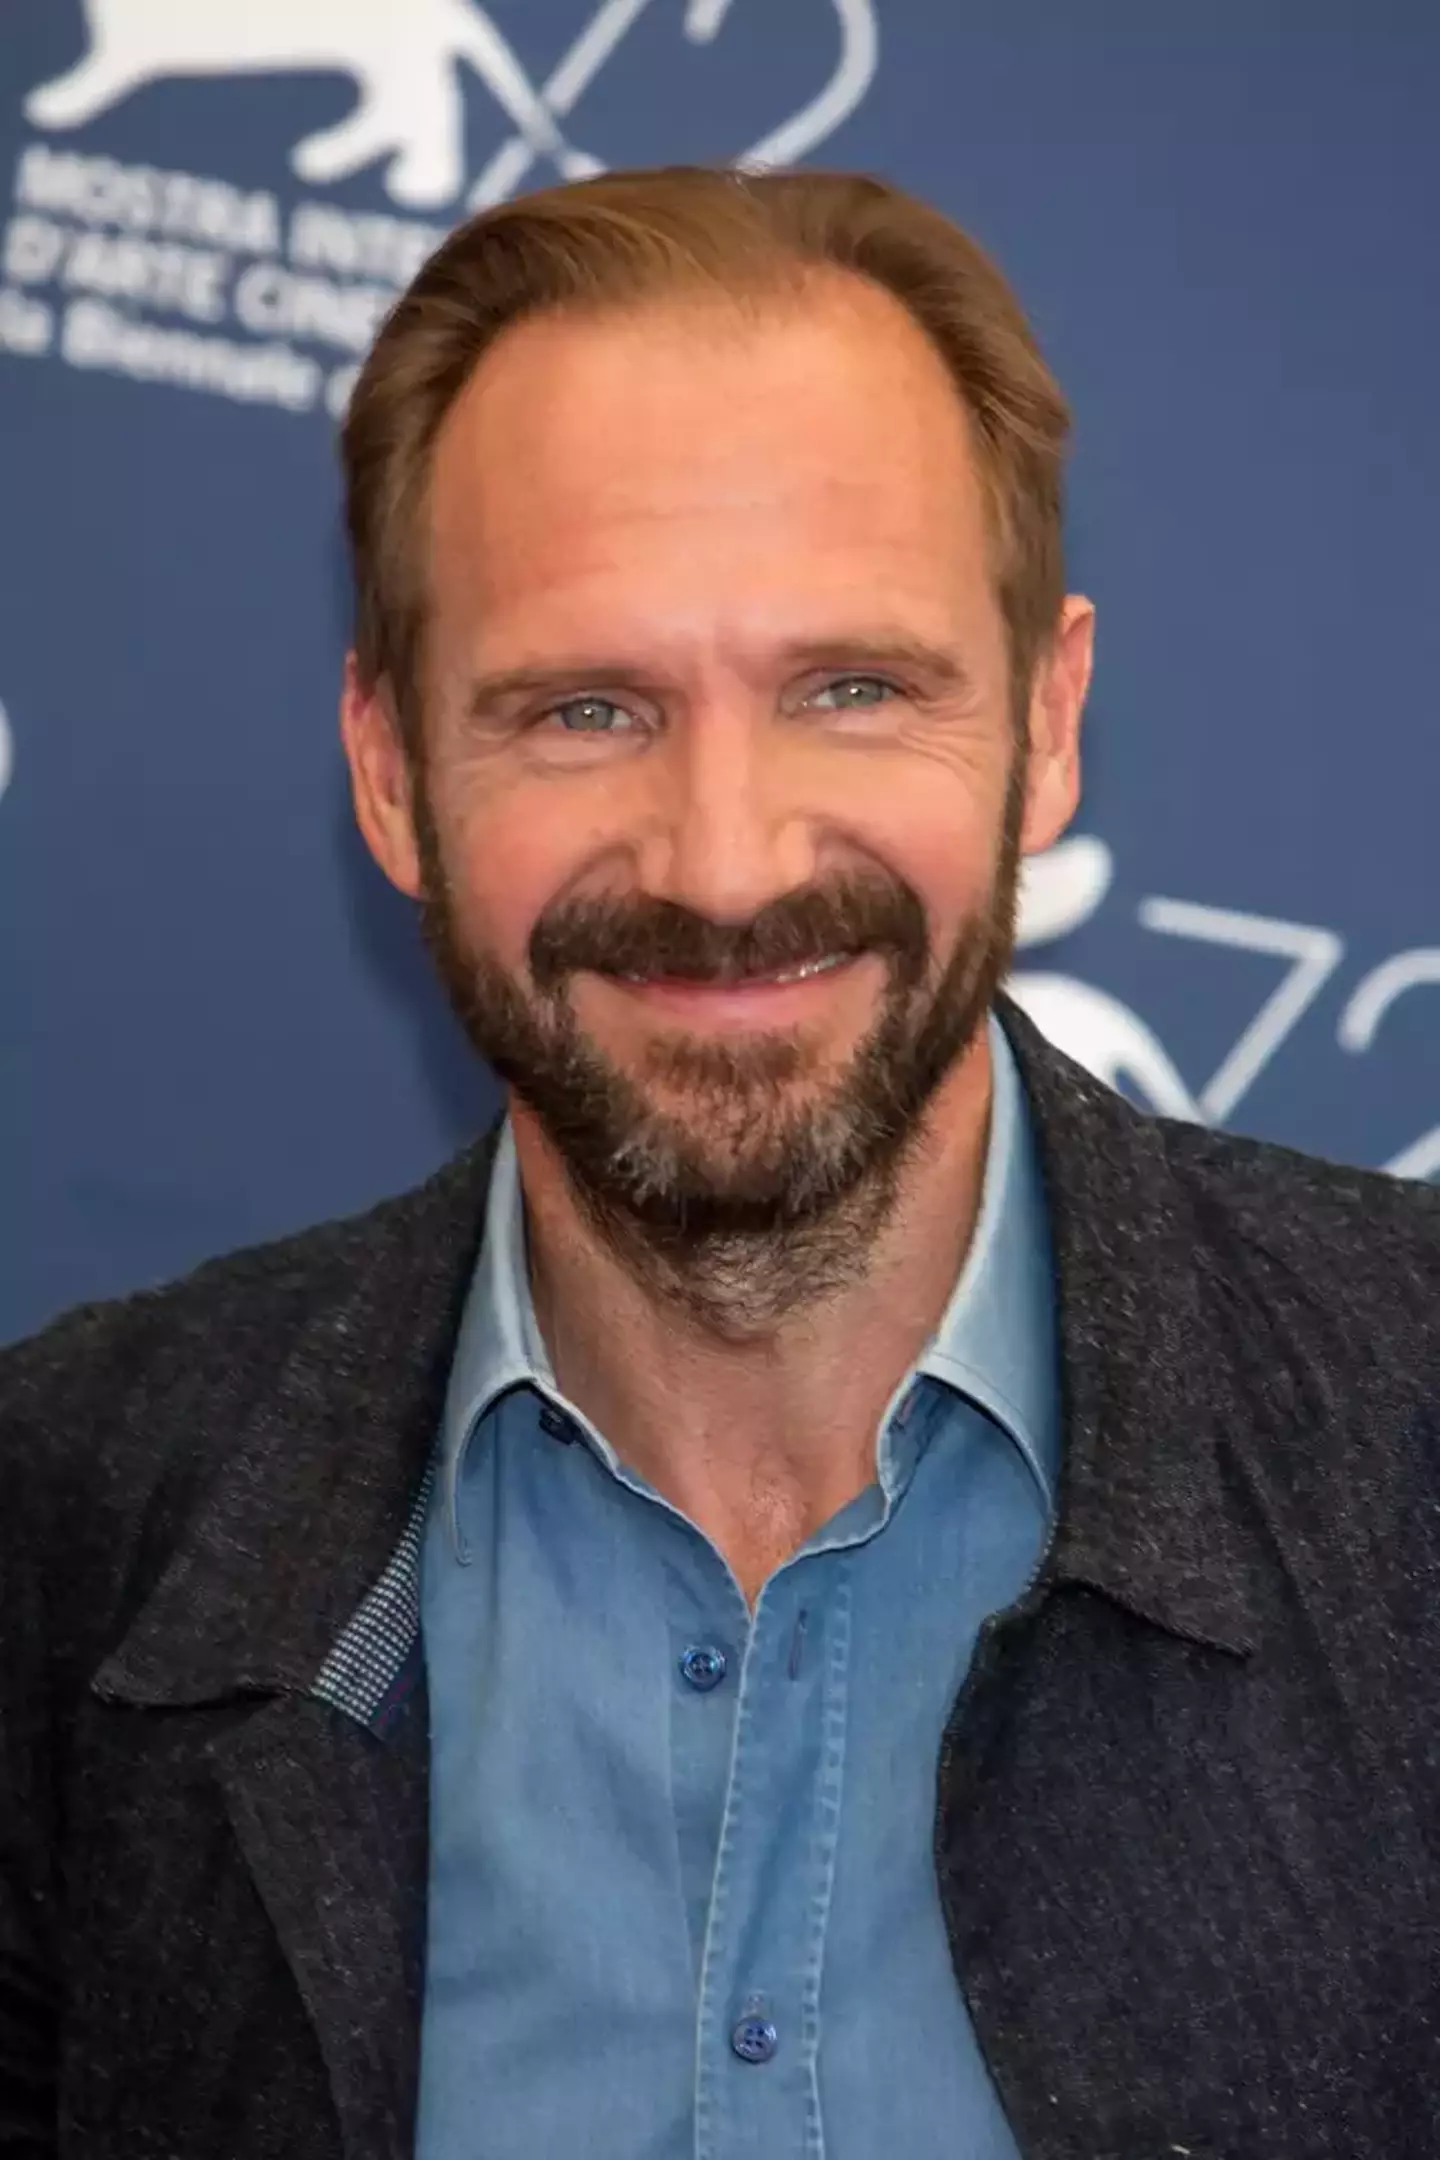 Ralph Fiennes is the current M in the James Bond franchise, but whether he'll be back for the next movie is a mystery.